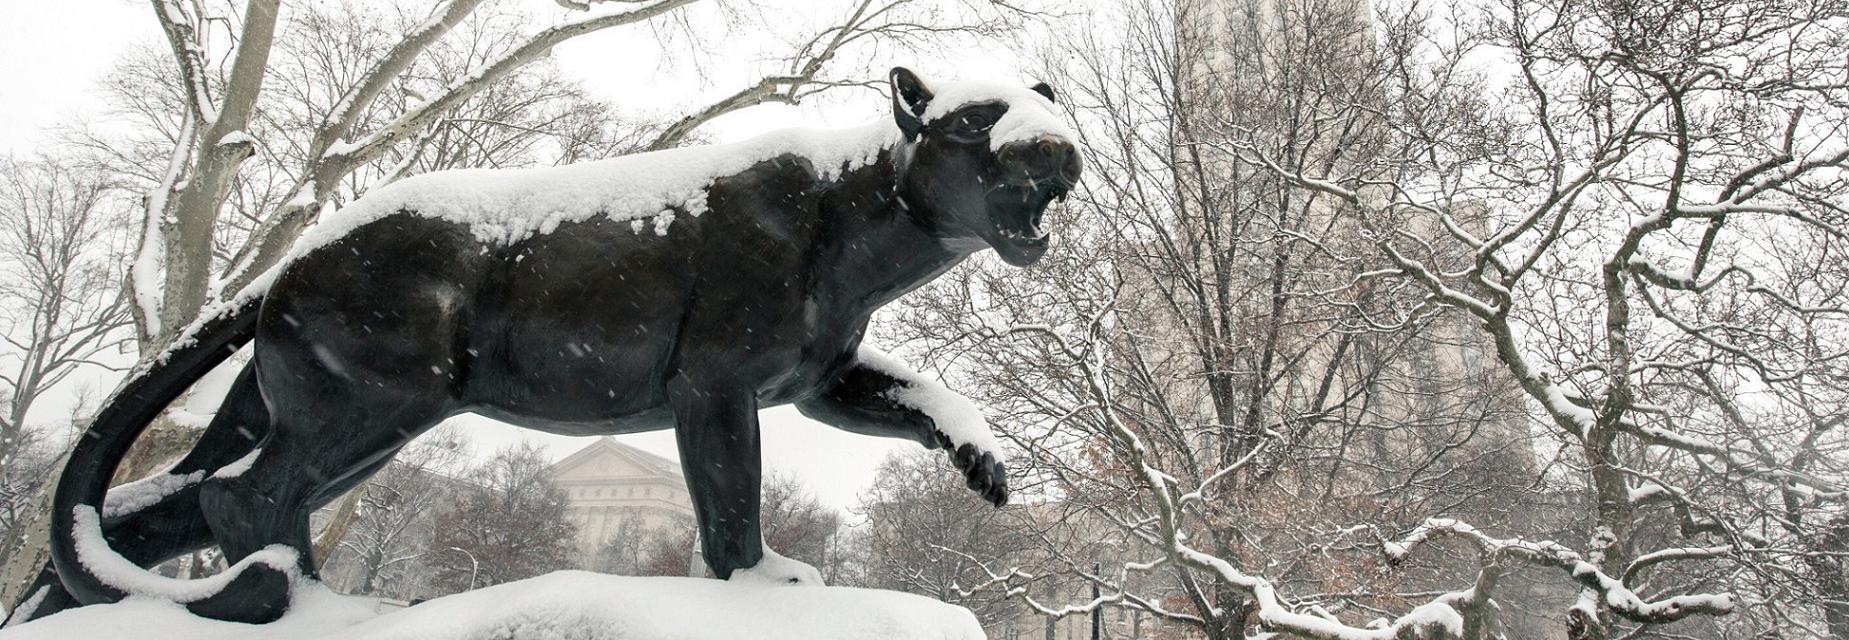 Panther in Snow